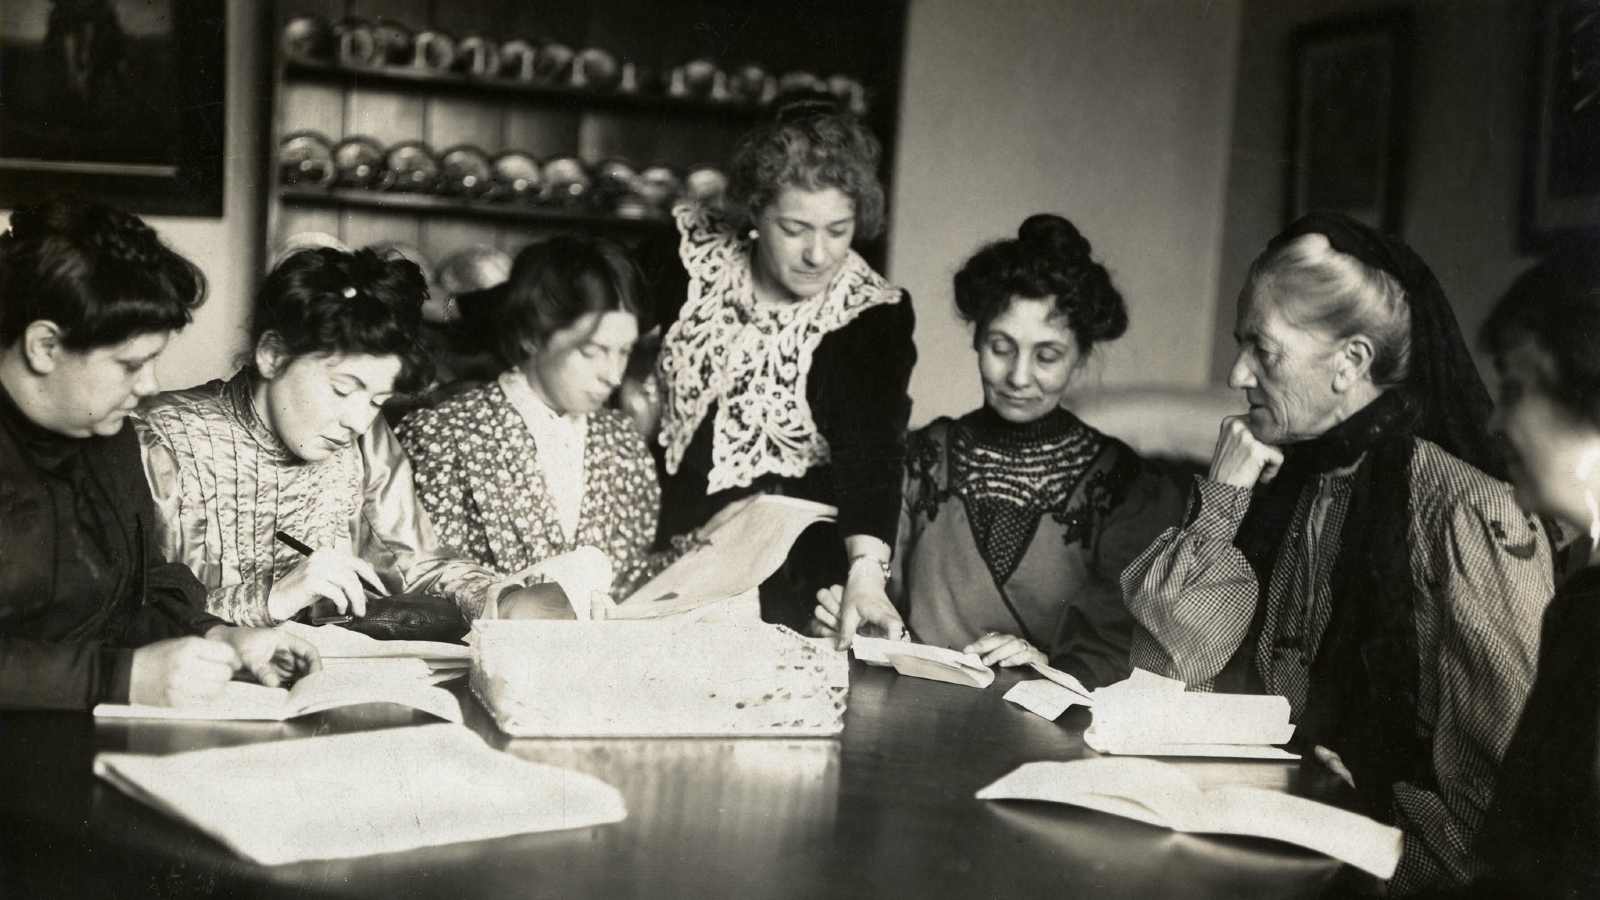 A group of women who represent the Women's Social and Political Union leadership mostly seated around a table working together.